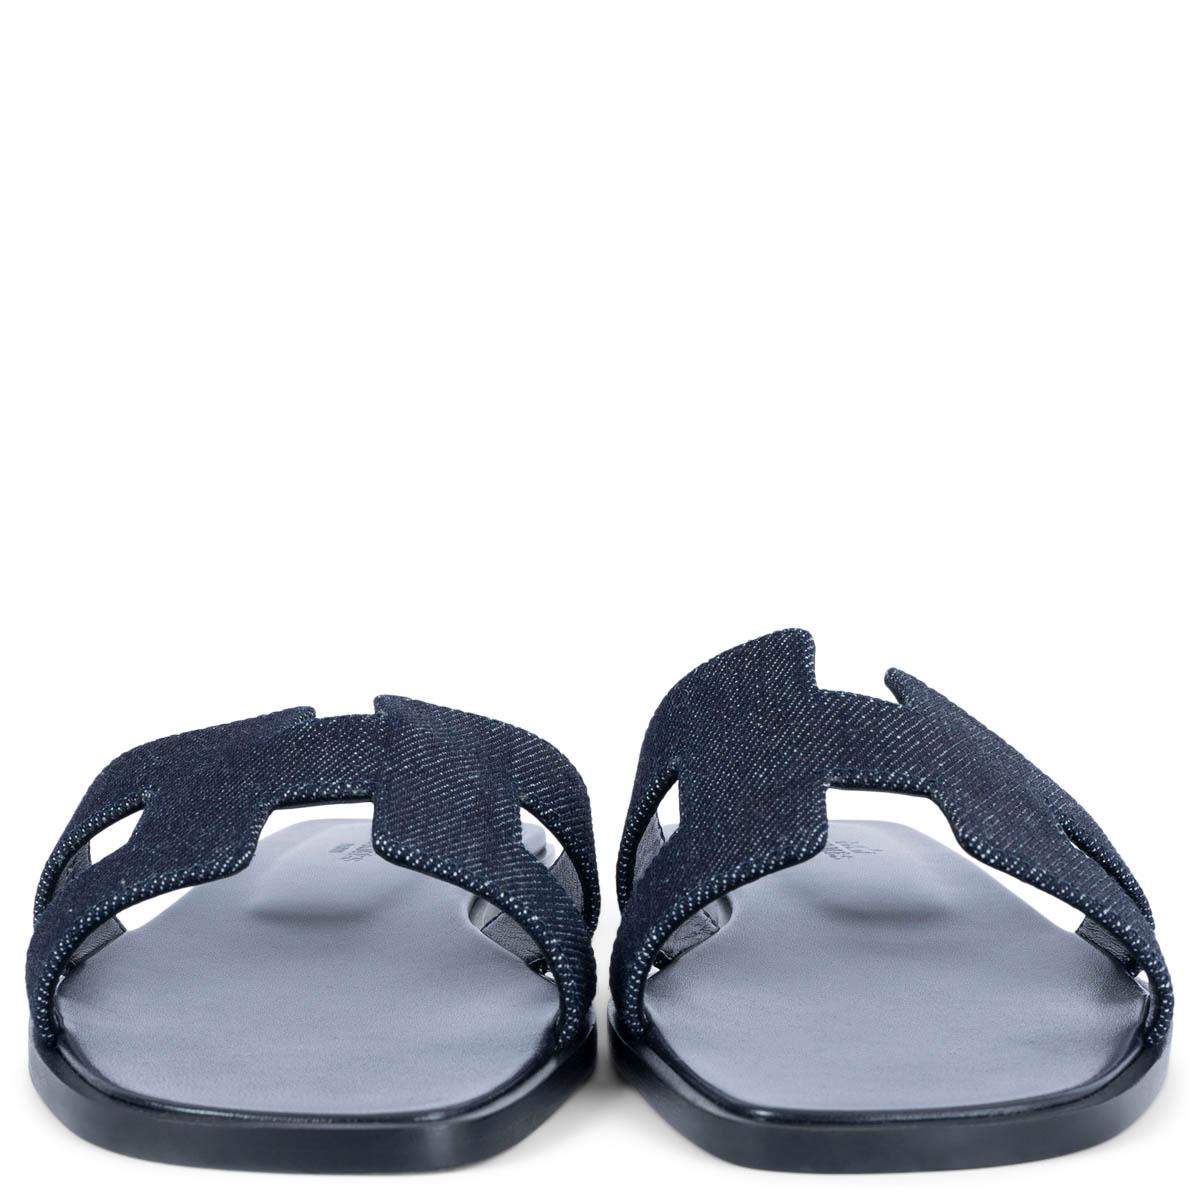 100% authentic Hermès Oran sandals in Bleu Brut (dark blue) denim with iconic H cut-out. Brand new. Come with dust bags. 

Measurements
Model	H021056Z 01340
Imprinted Size	37.5
Shoe Size	37.5
Inside Sole	24.5cm (9.6in)
Width	8cm (3.1in)
Heel	1.5cm